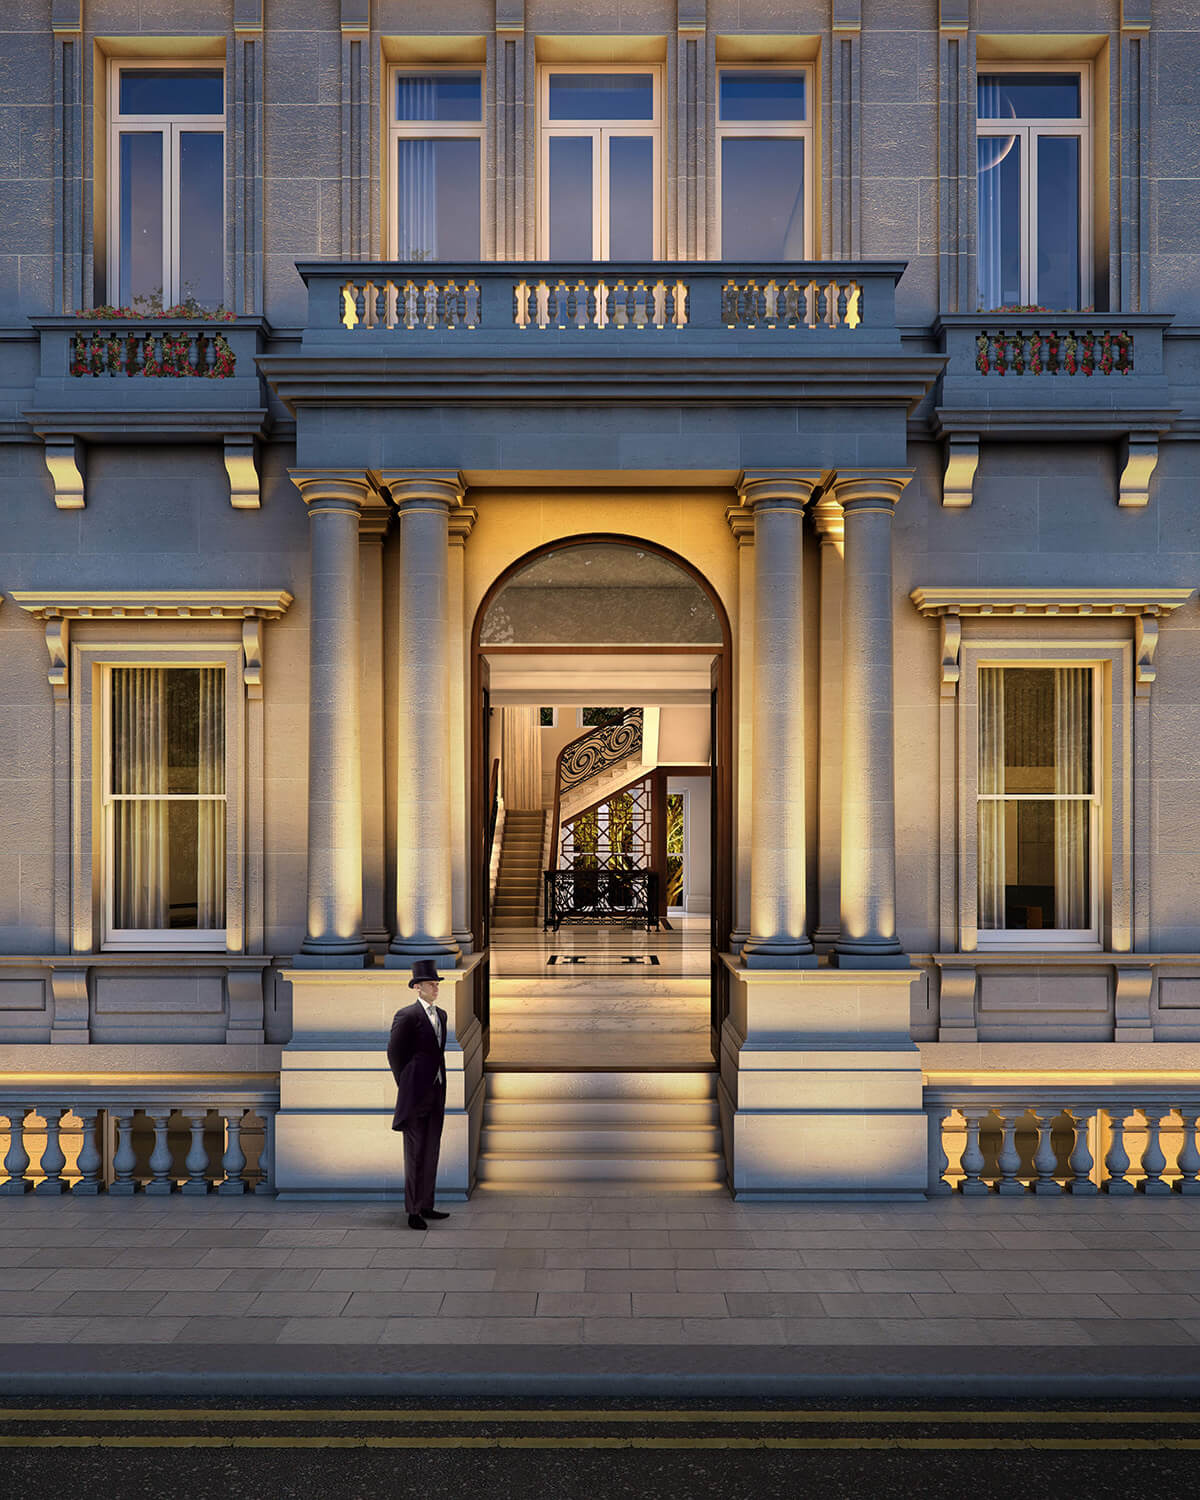 Grand entrance way with footman, pillars and arch with stairs leading into luxury devleopment